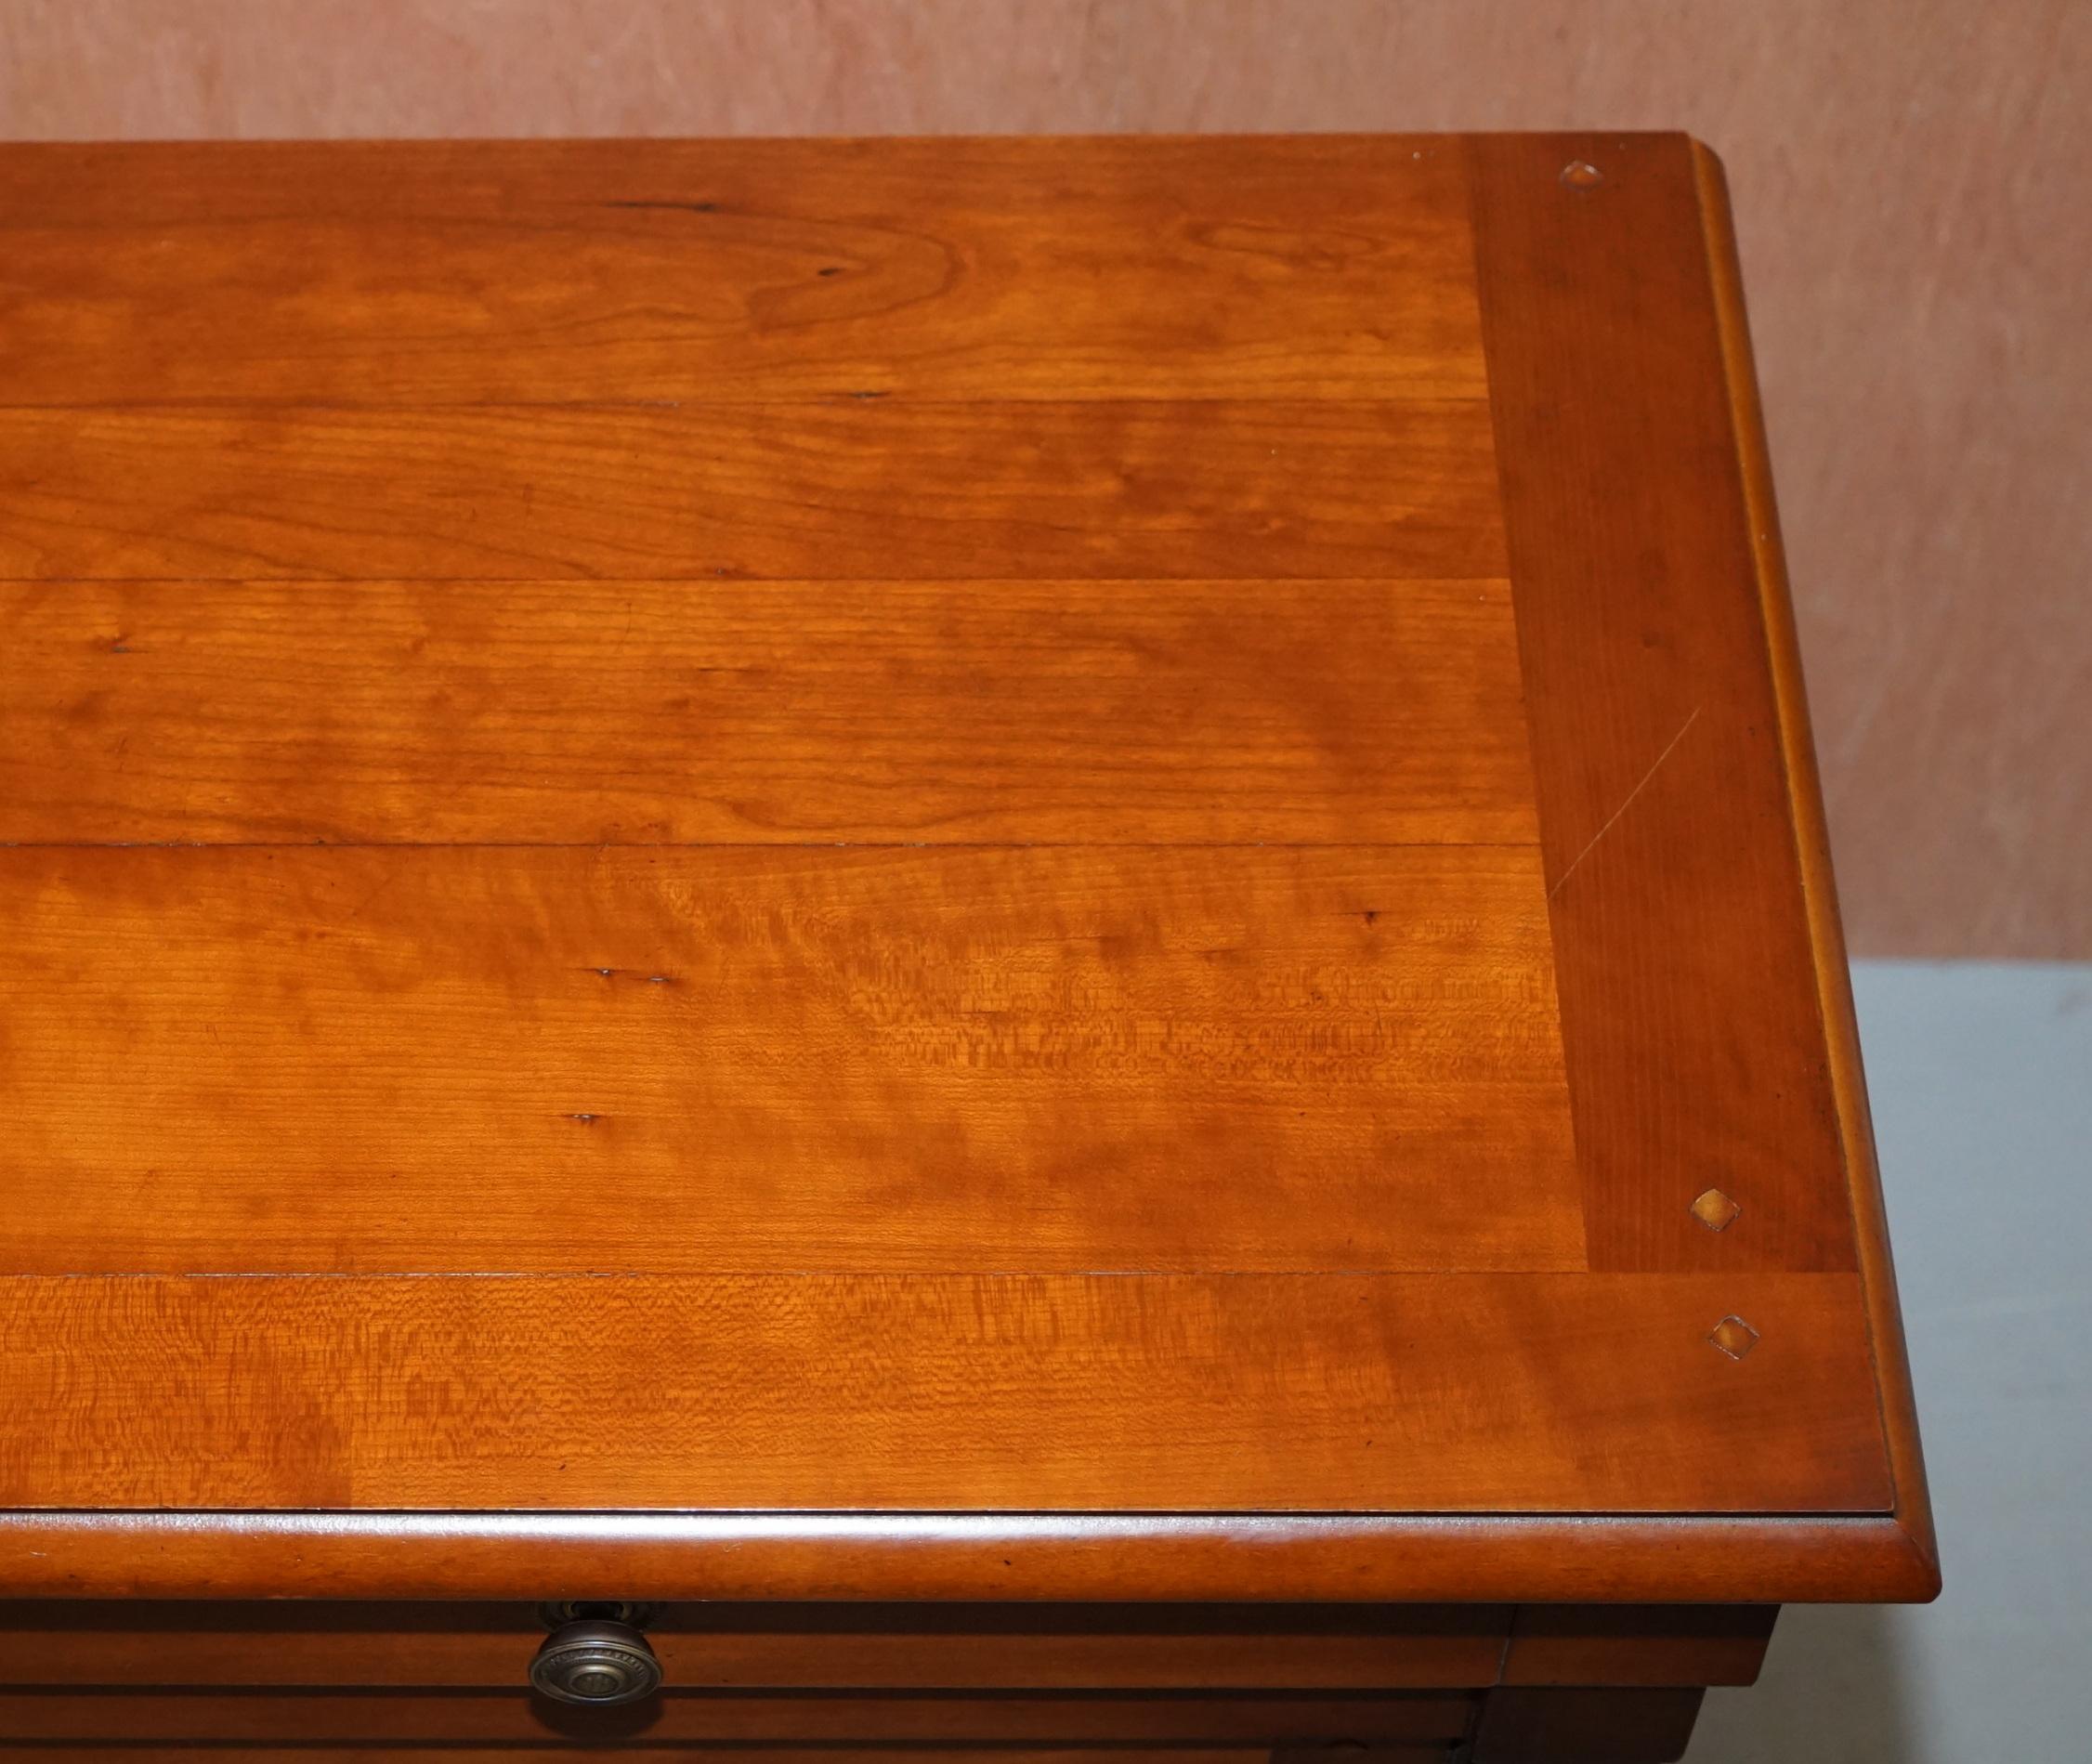 Hand-Crafted 1 of 2 Large Grange France Cherry Wood Sideboard Cupboard Drawers Lovely Timber